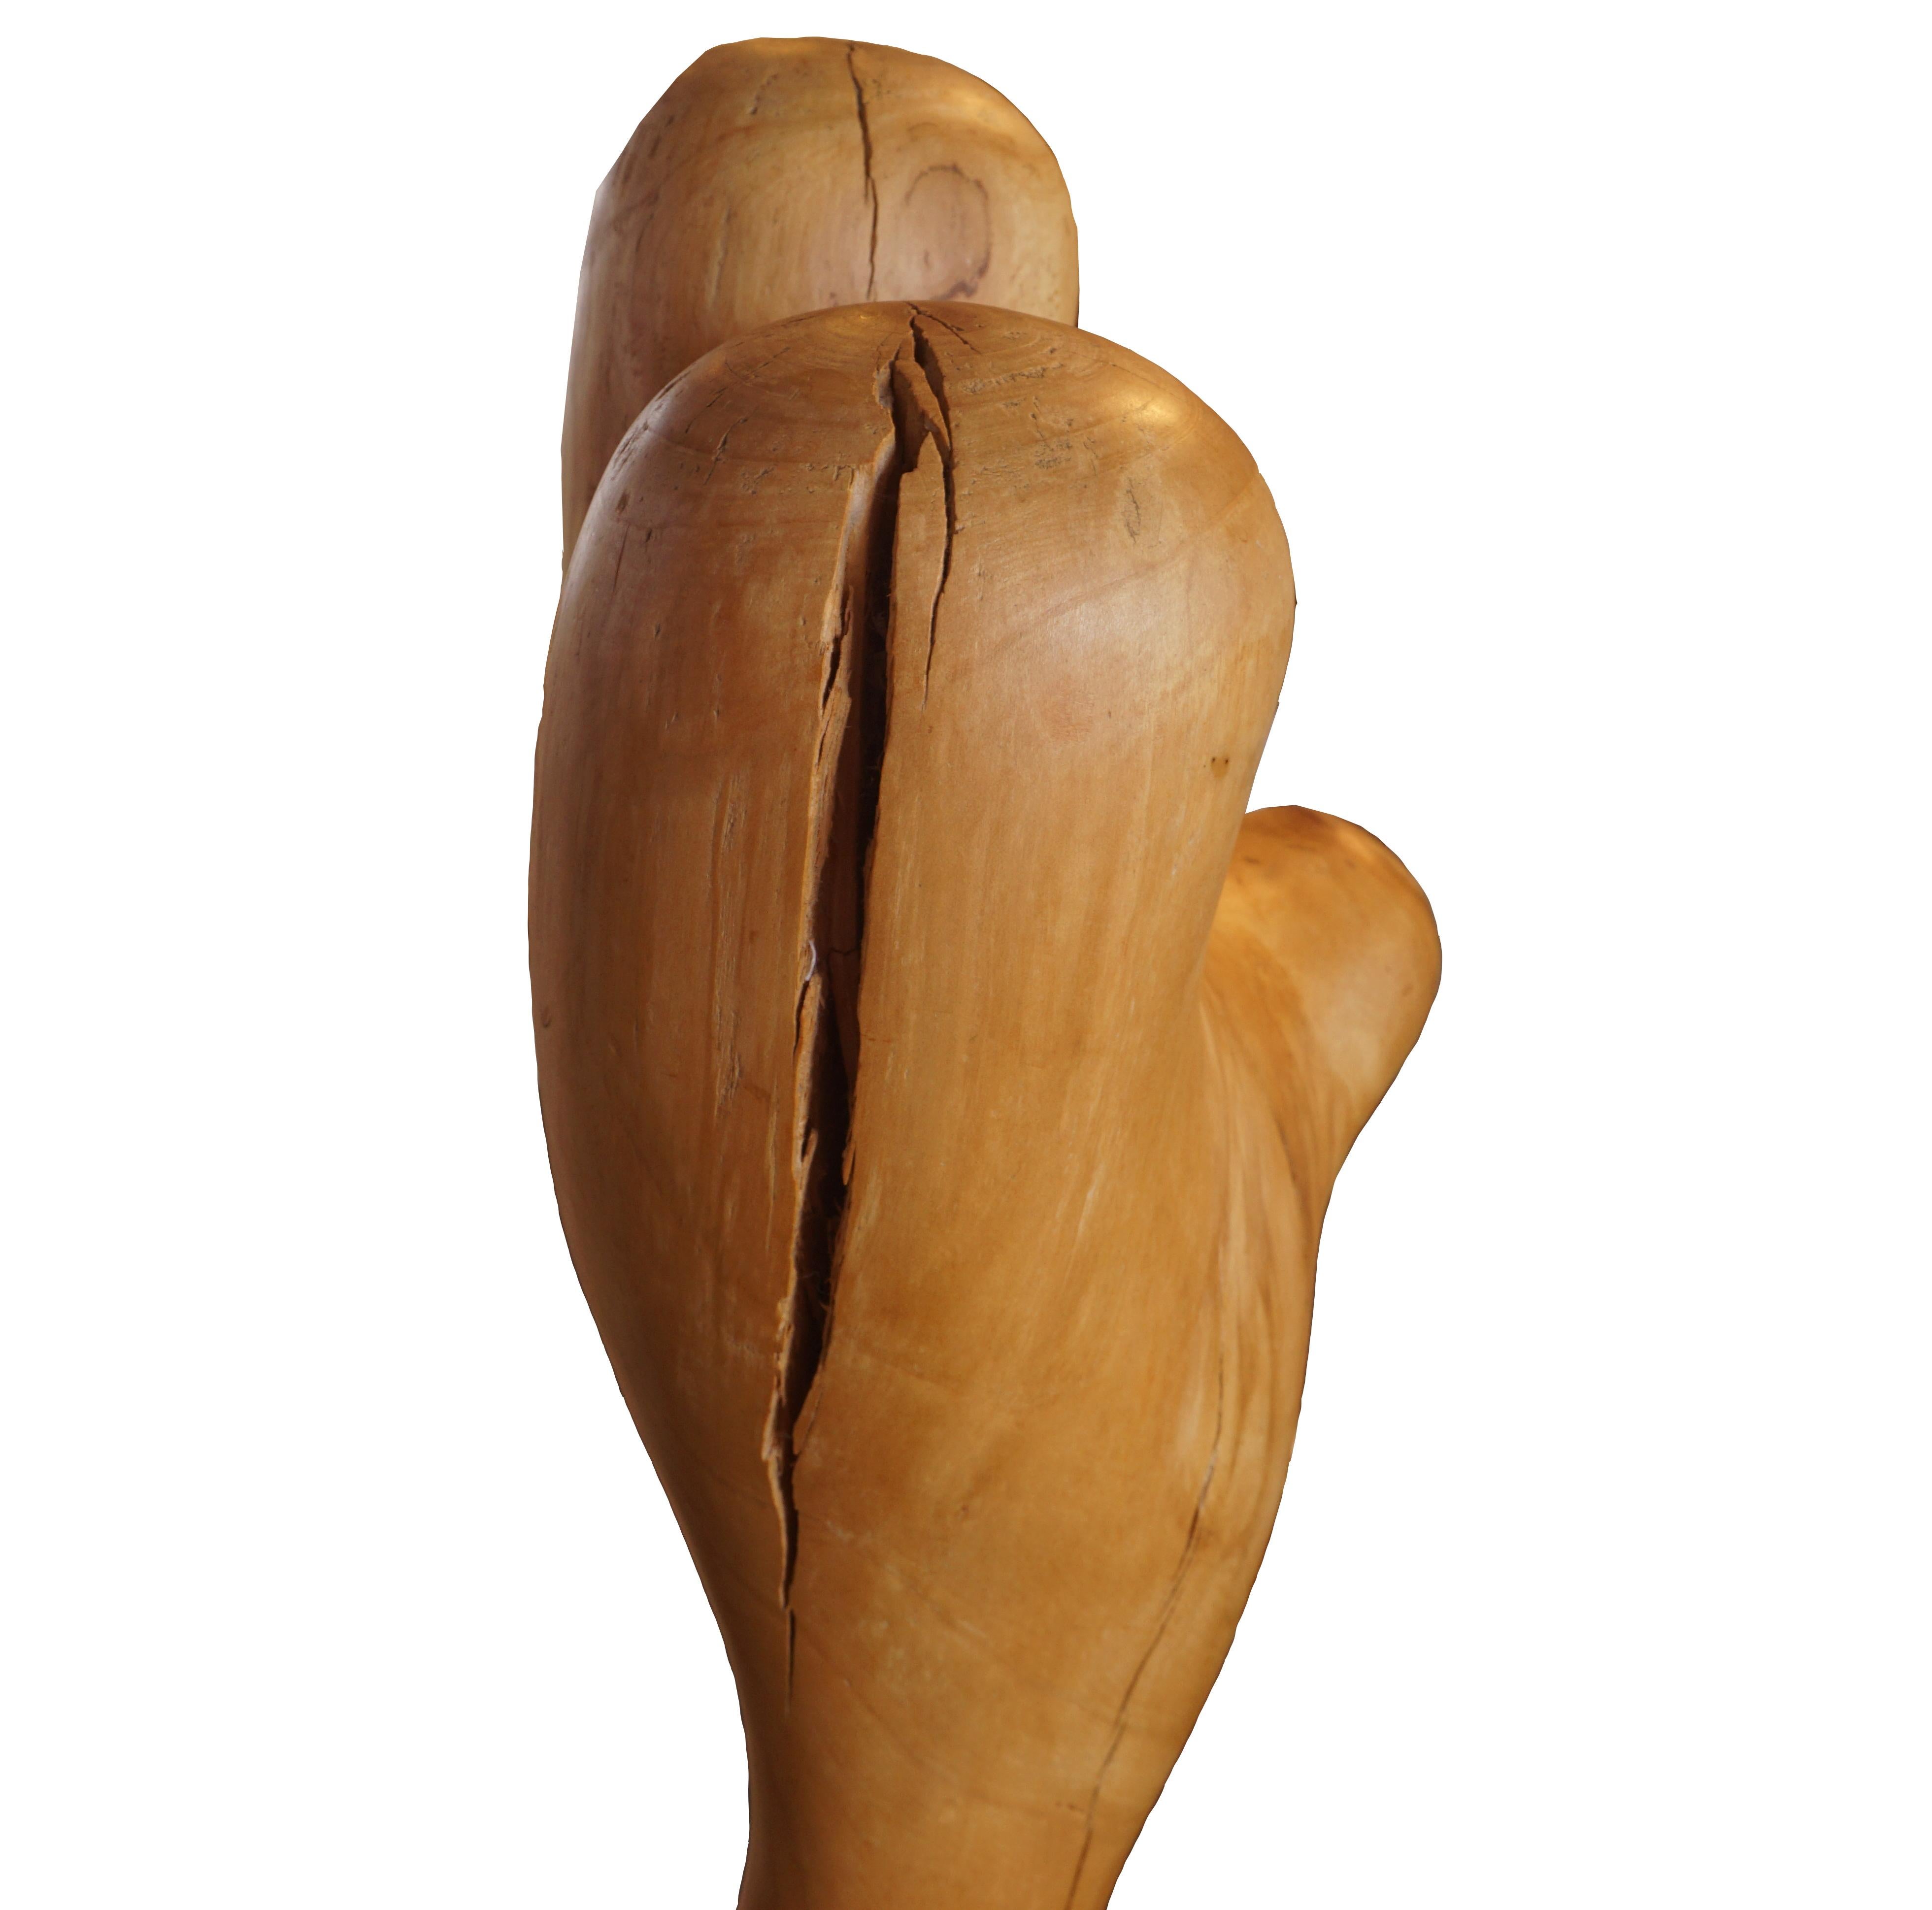 Late 20th Century Modern Danish Organic Beech Sculpture by Ulrika Marseen Signed and Dated 1984 For Sale